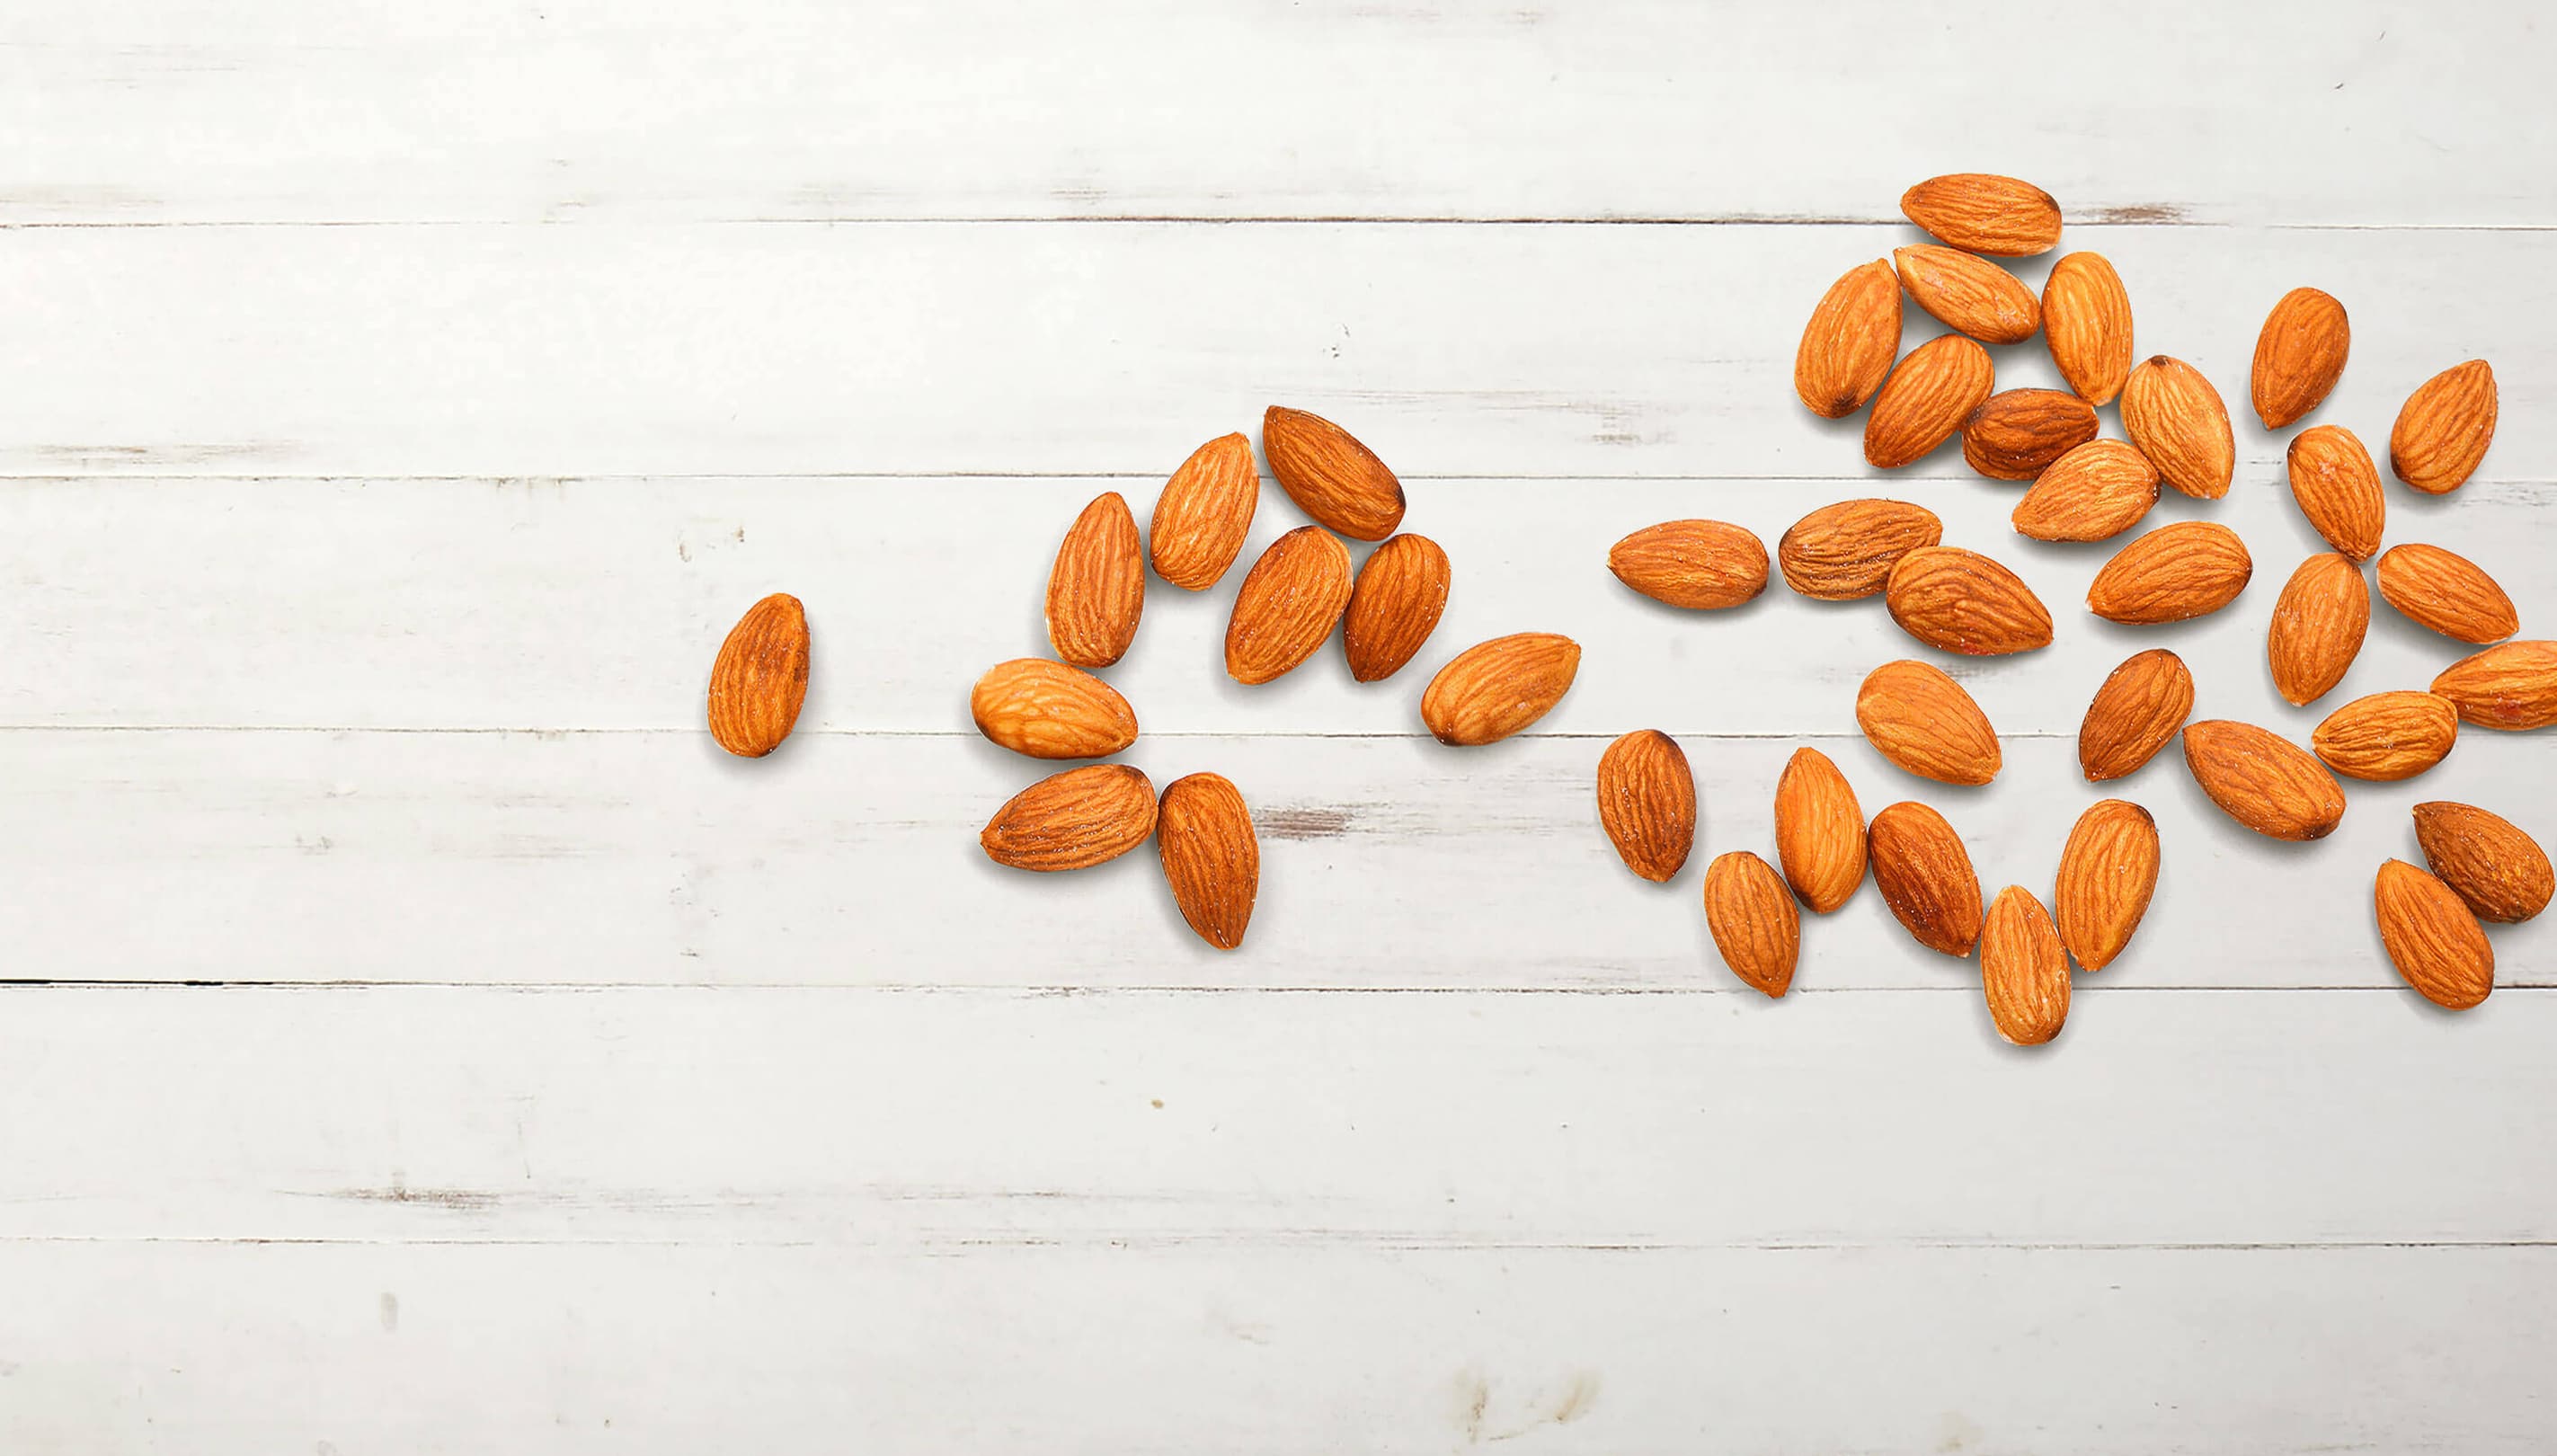 Almonds displayed on a wood background